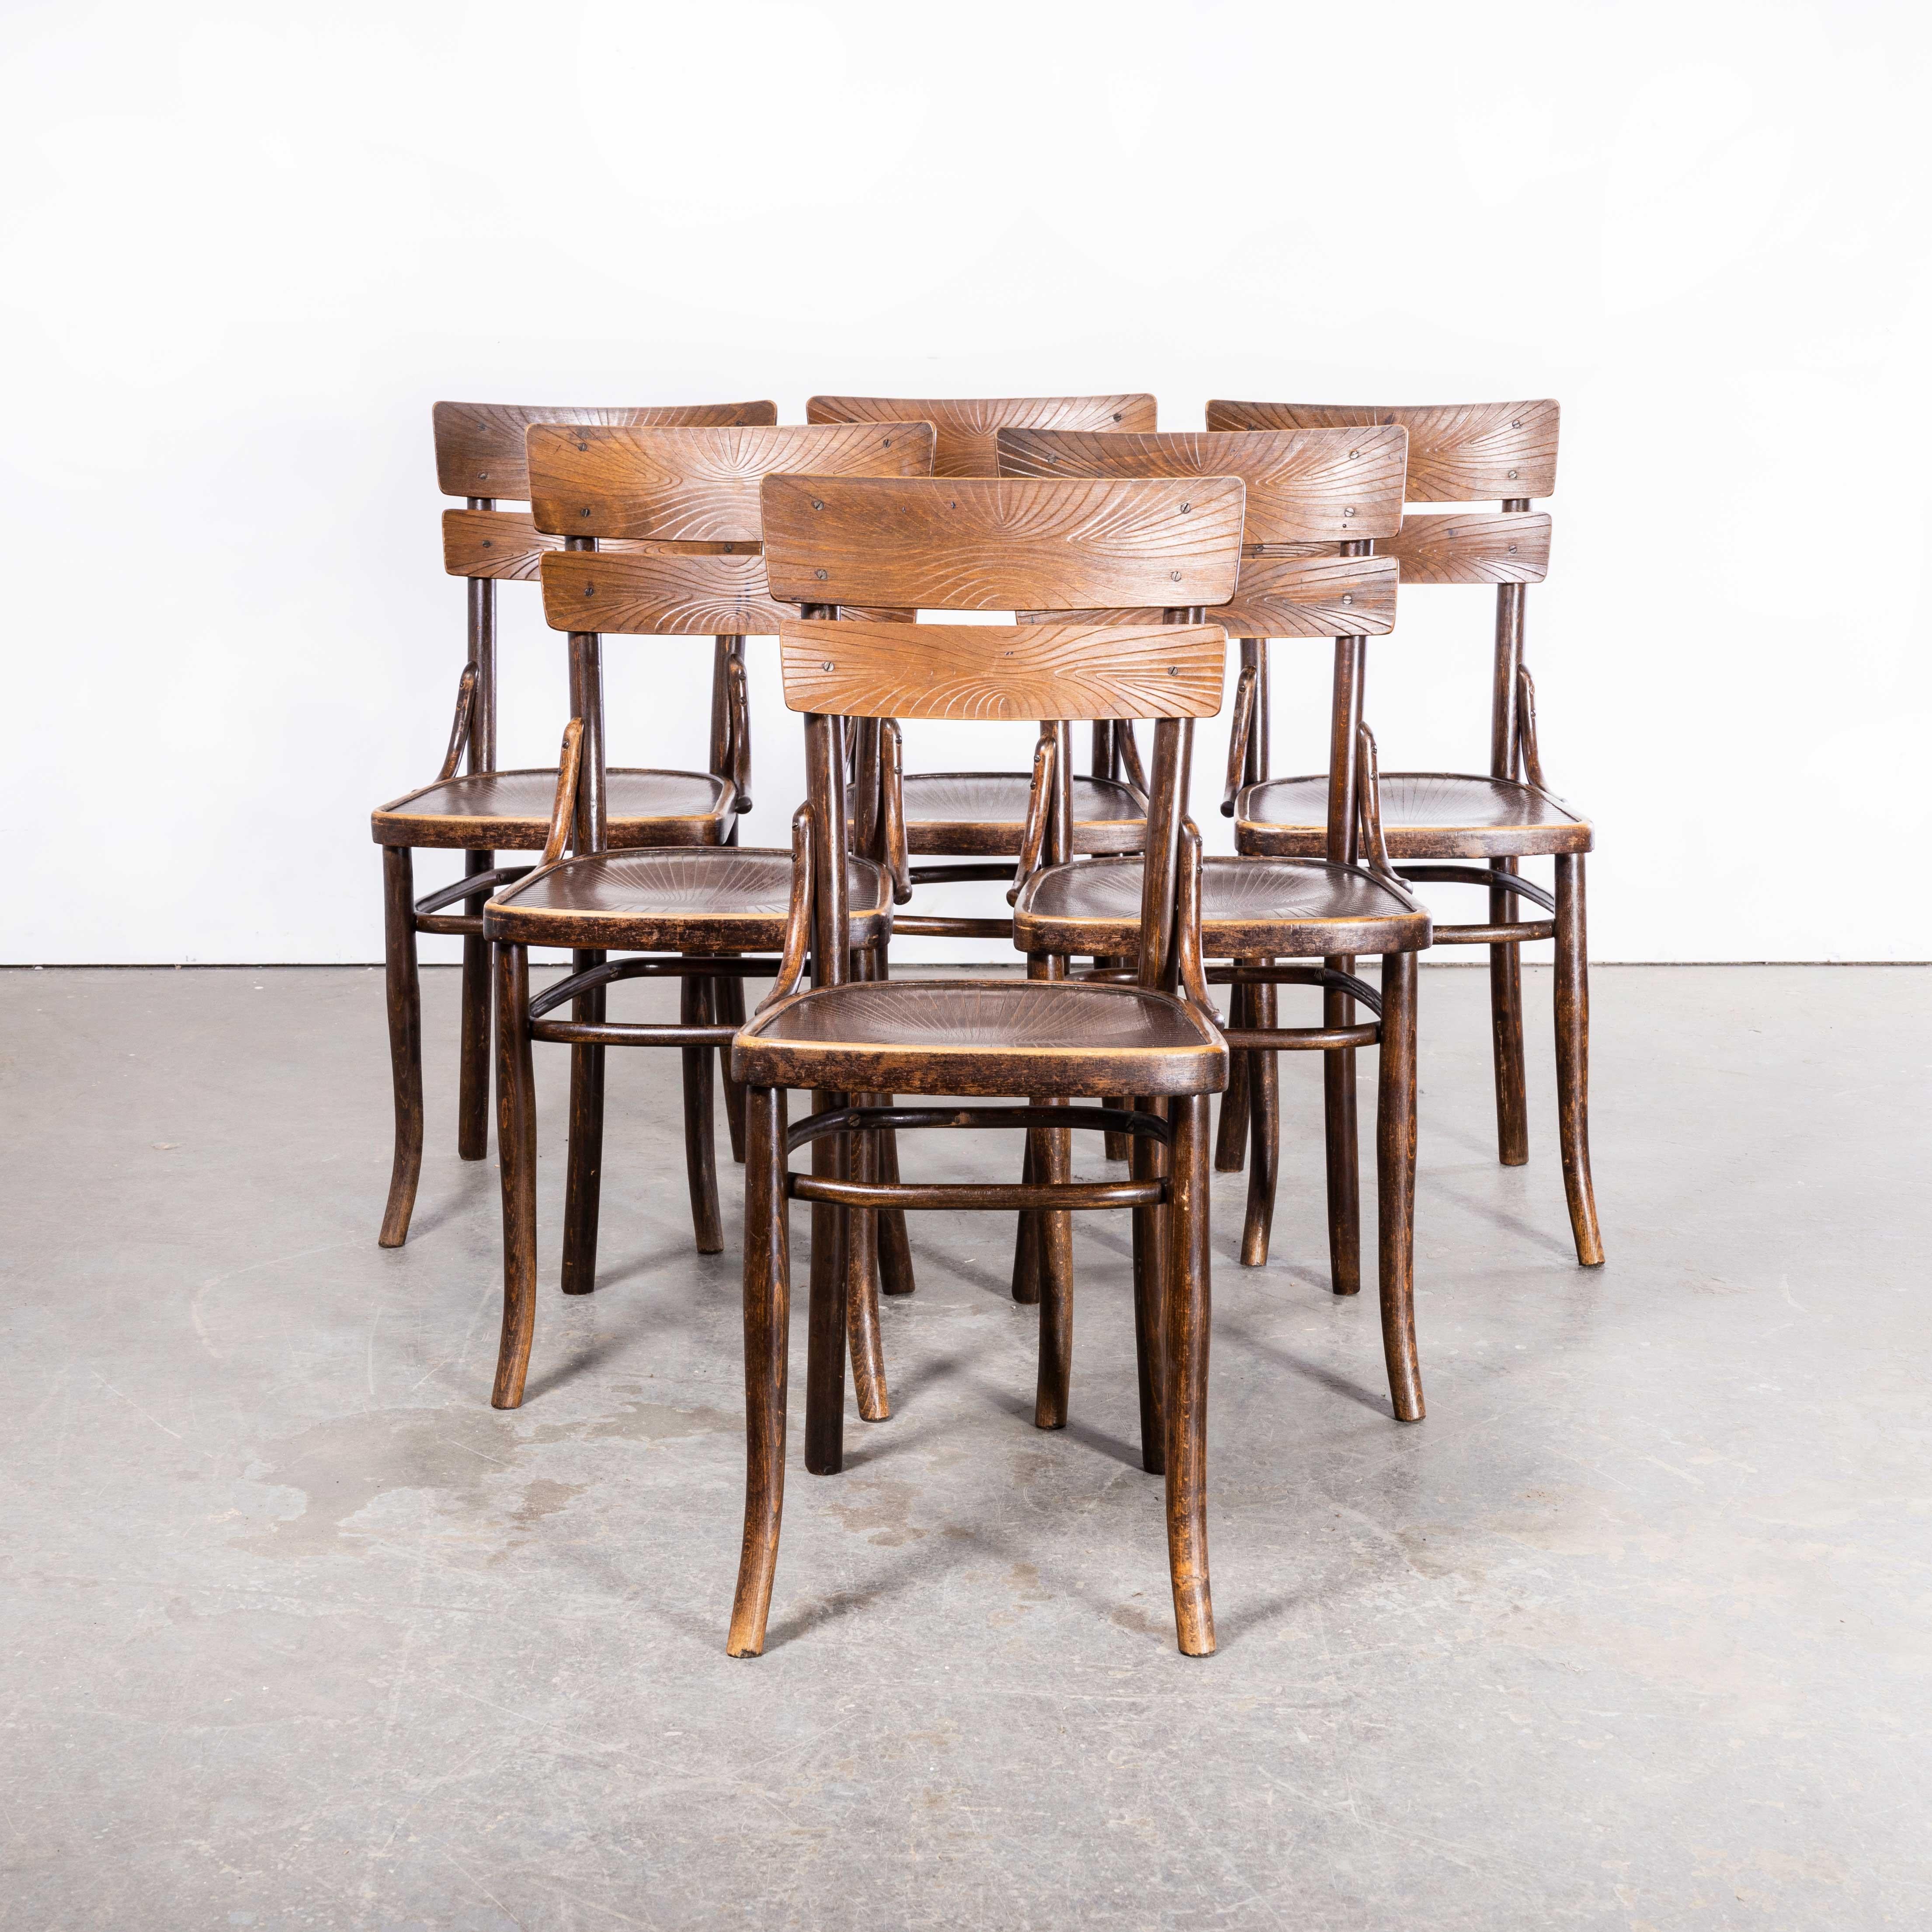 910’s Bentwood Ladder Back Dining Chairs – Mundus – Set Of Six
1910’s Bentwood Ladder Back Dining Chairs – Mundus – Set Of Six. At the beginning of the 20th Century their were two (amongst others) competing bentwood producers, J&J Kohn and Mundus.